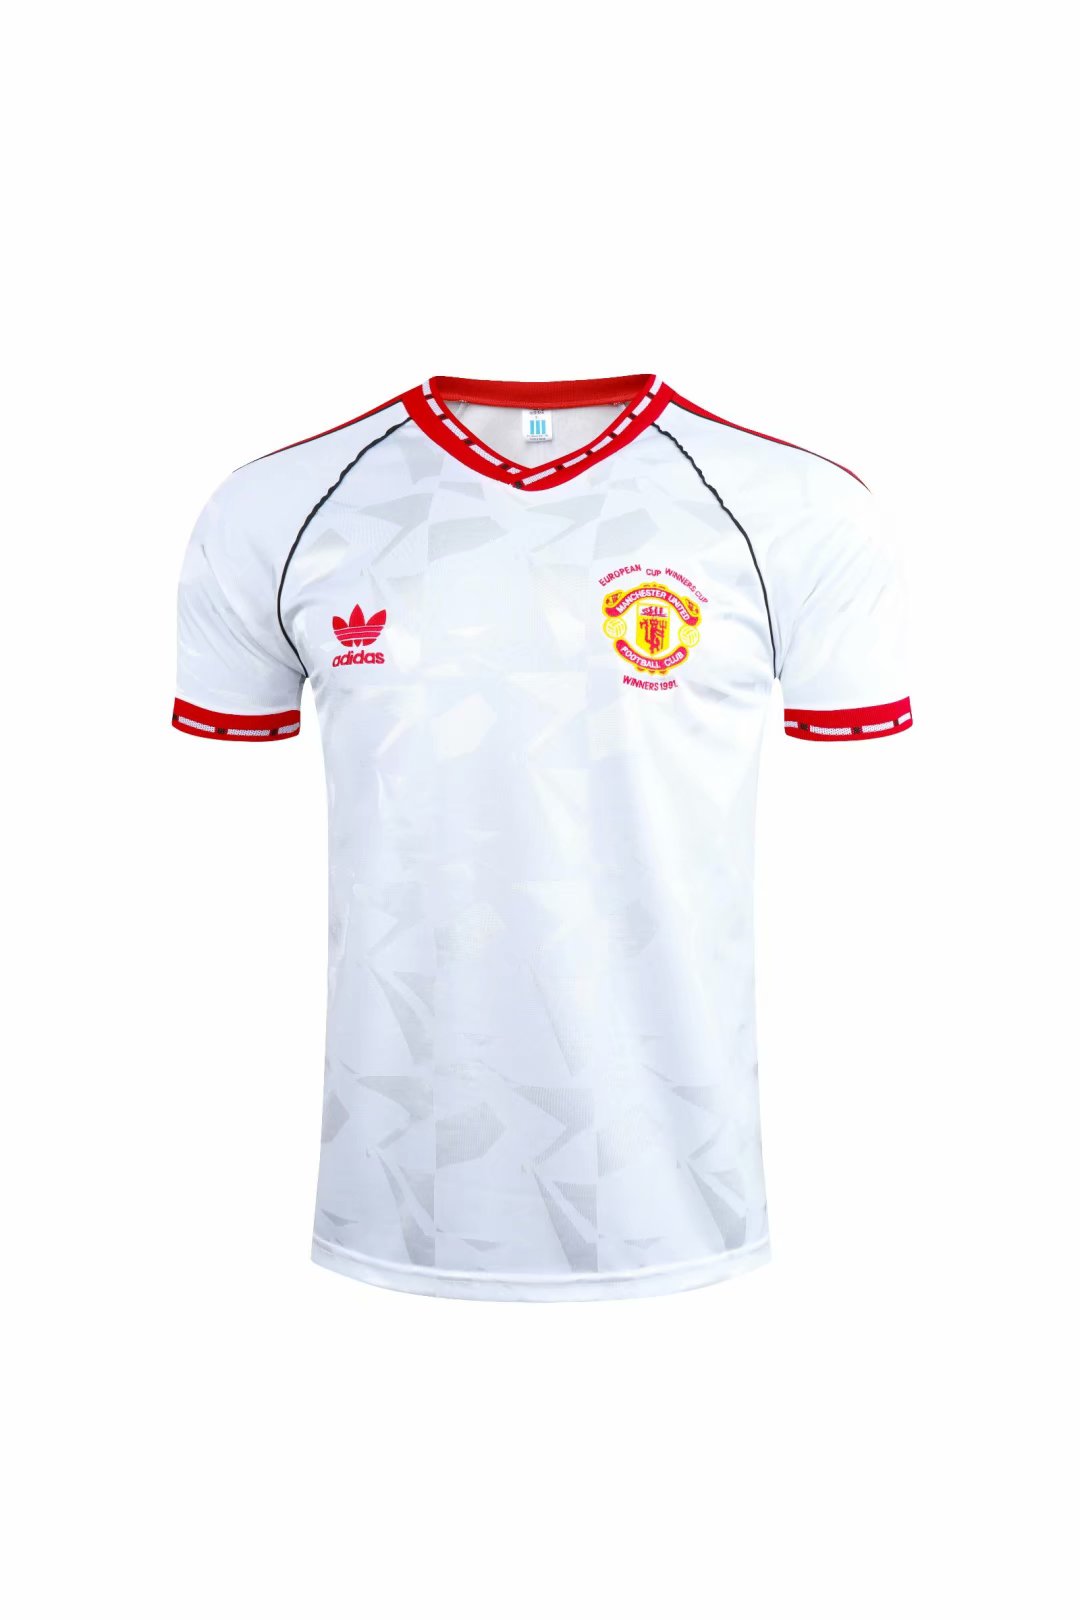 1991 Manchester United white cup winners cup shirt  Retro